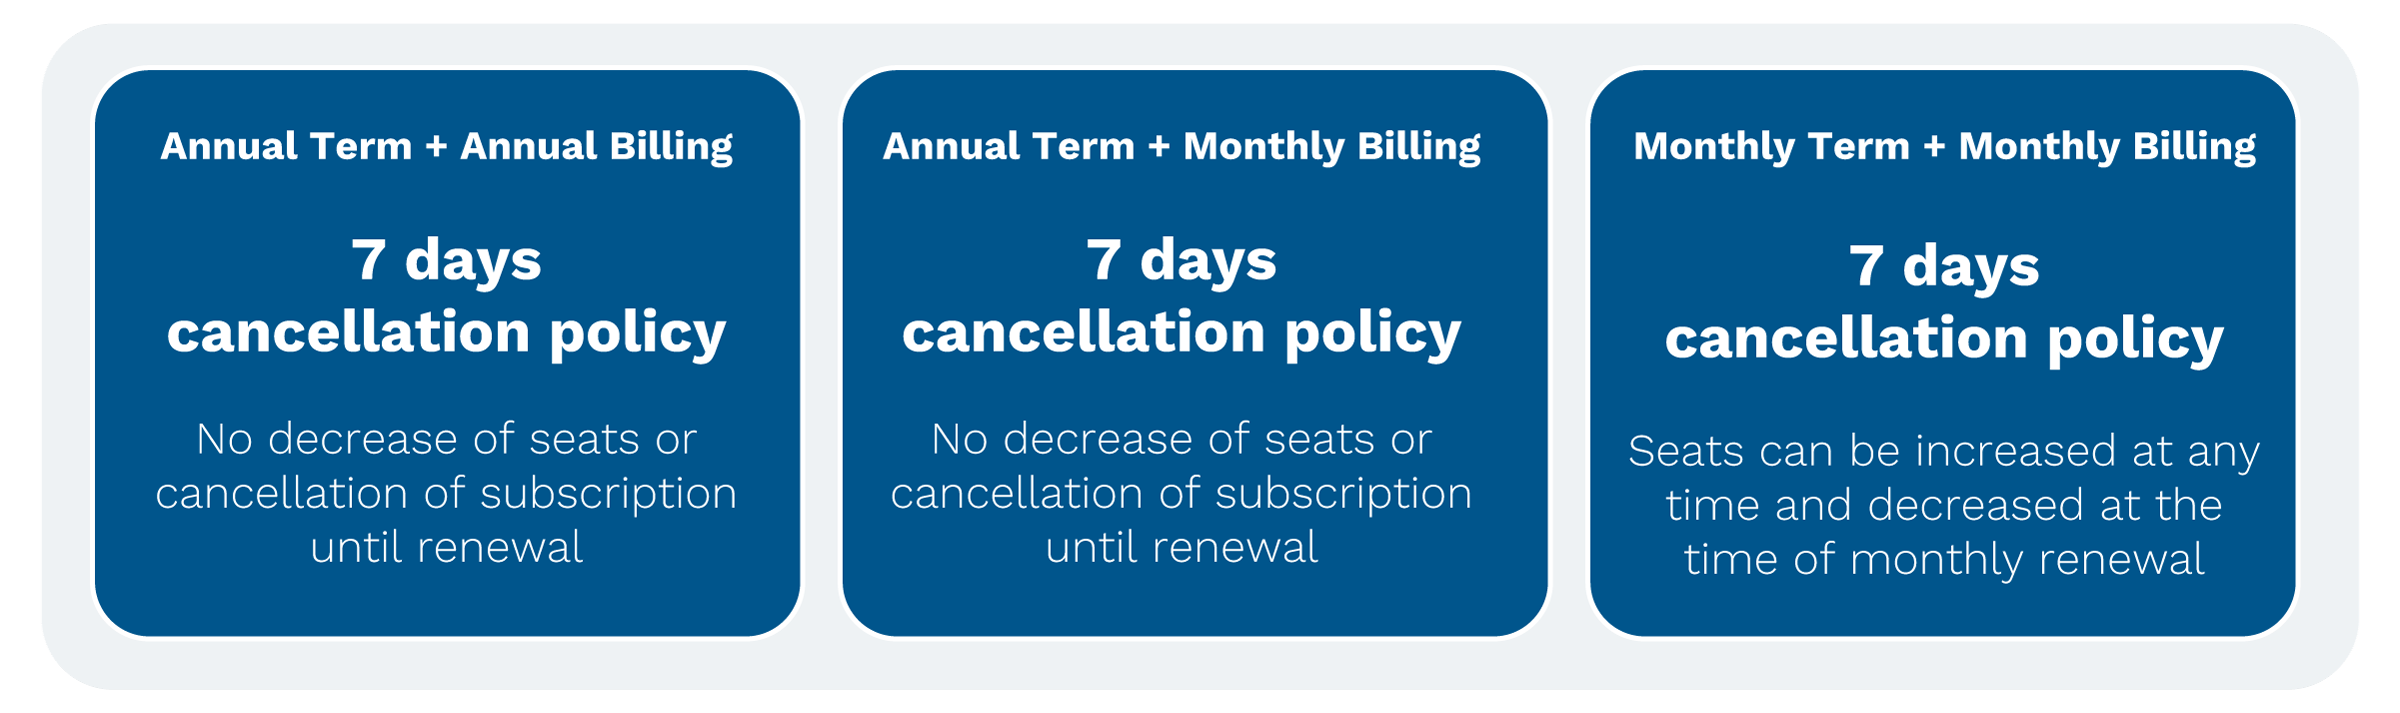 Subscription-cancellation-policy-2